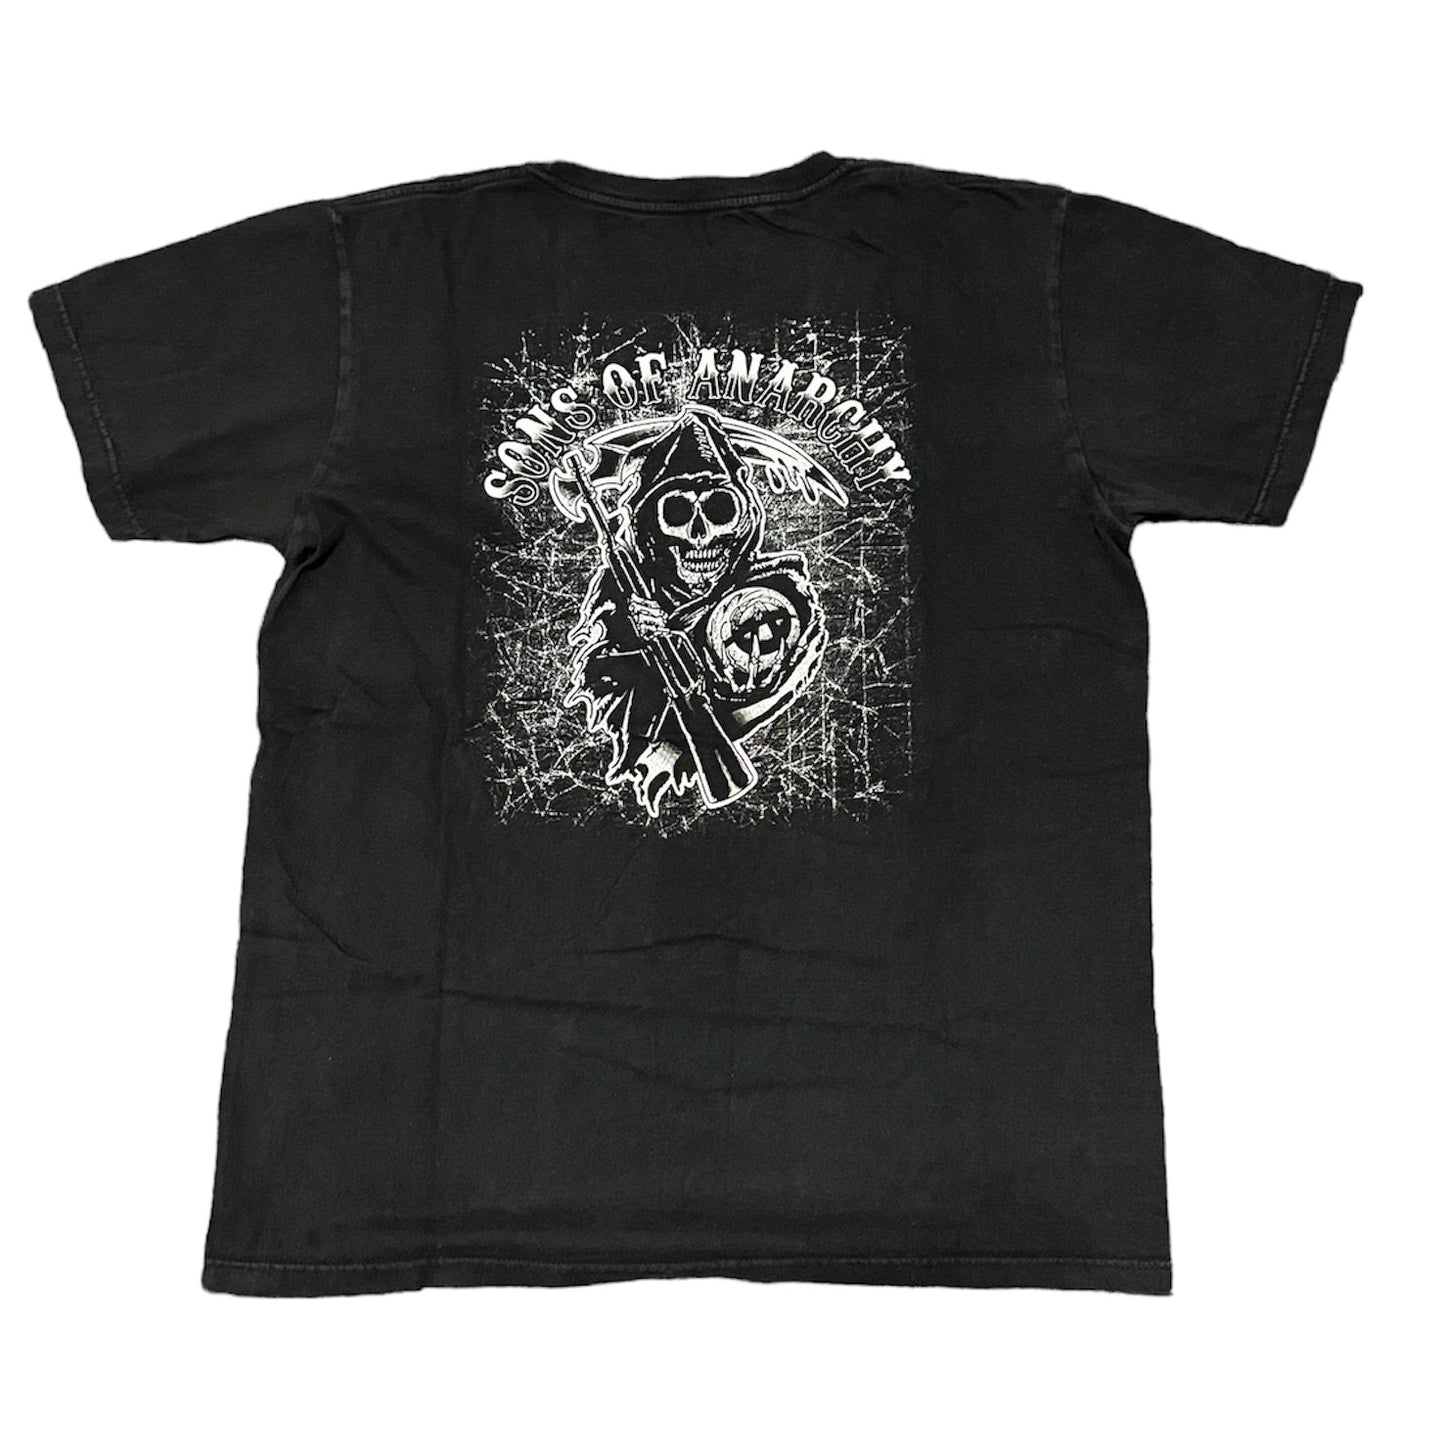 Sons Of Anarchy Shirt Black T-Shirt Size Large